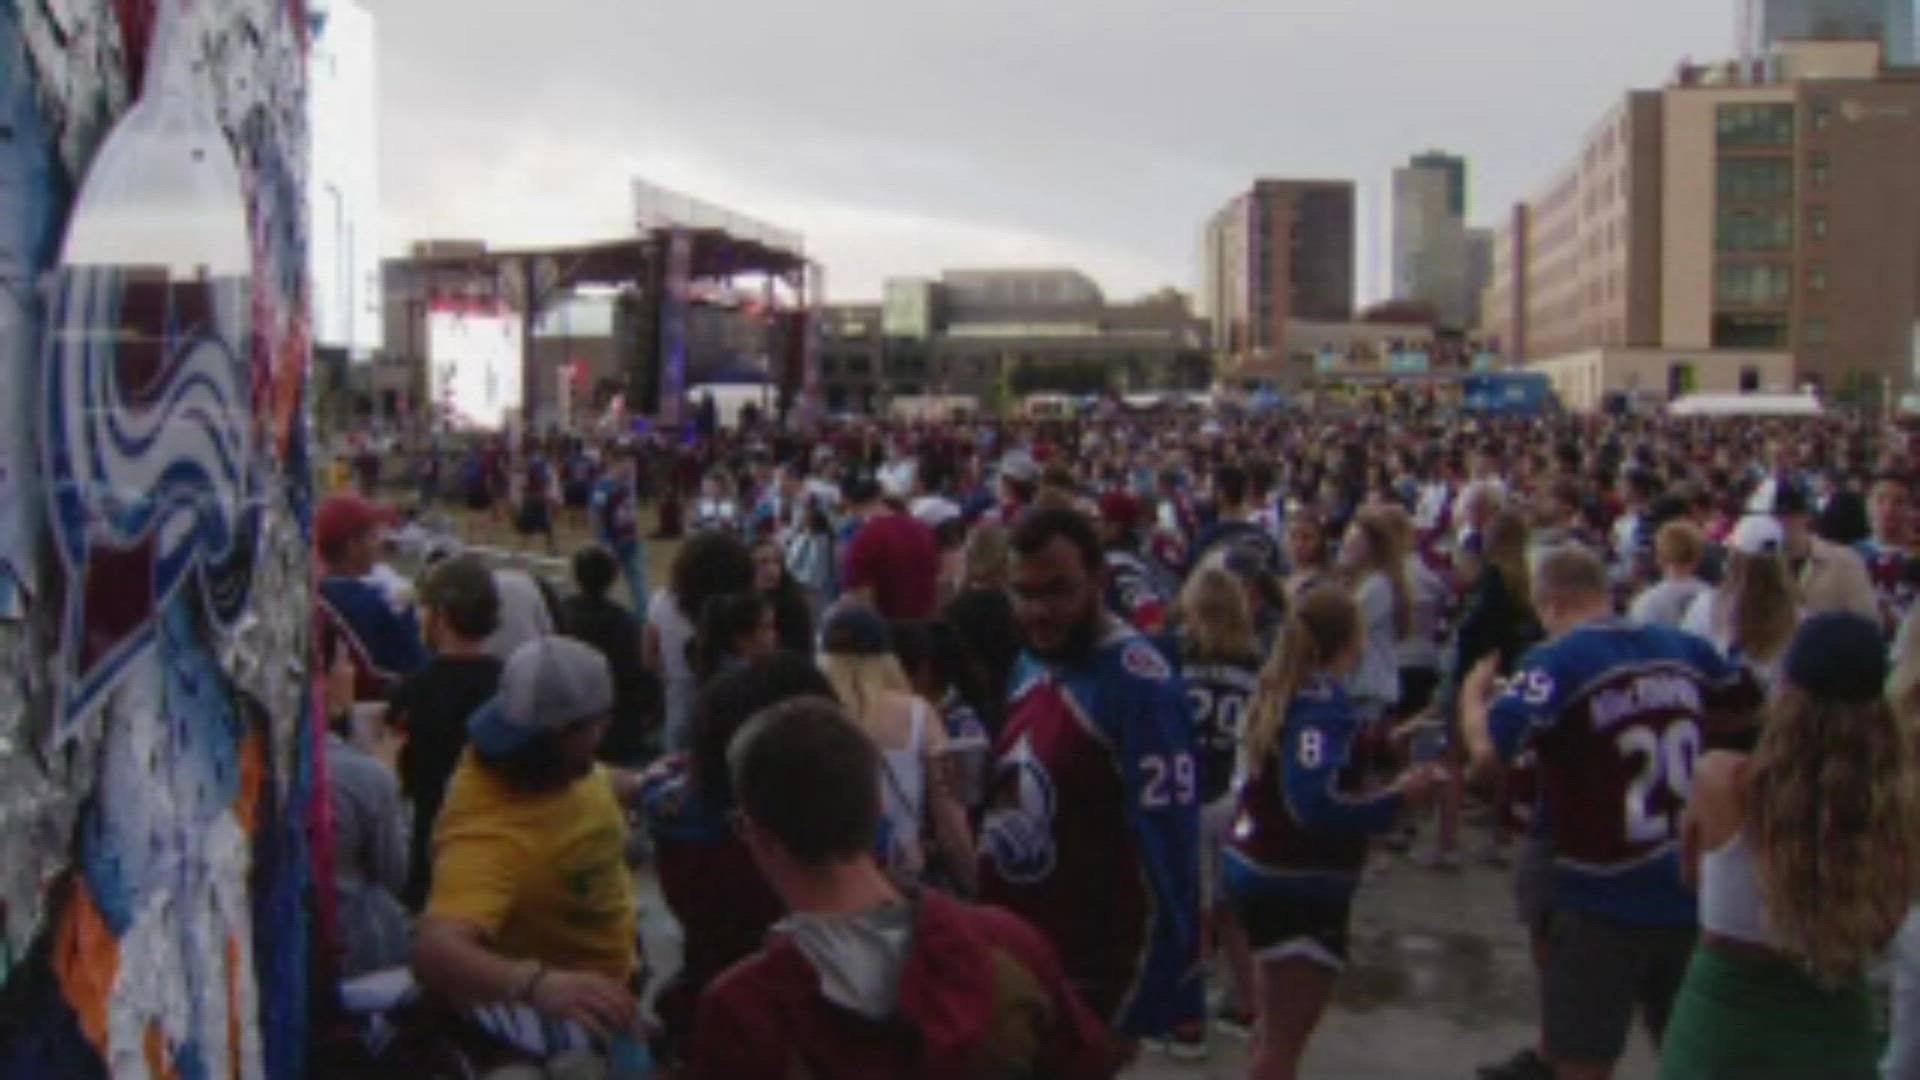 Game 5 of the Stanley Cup and Avalanche fans packed out Tivoli Quad hoping for a final win on Friday night.